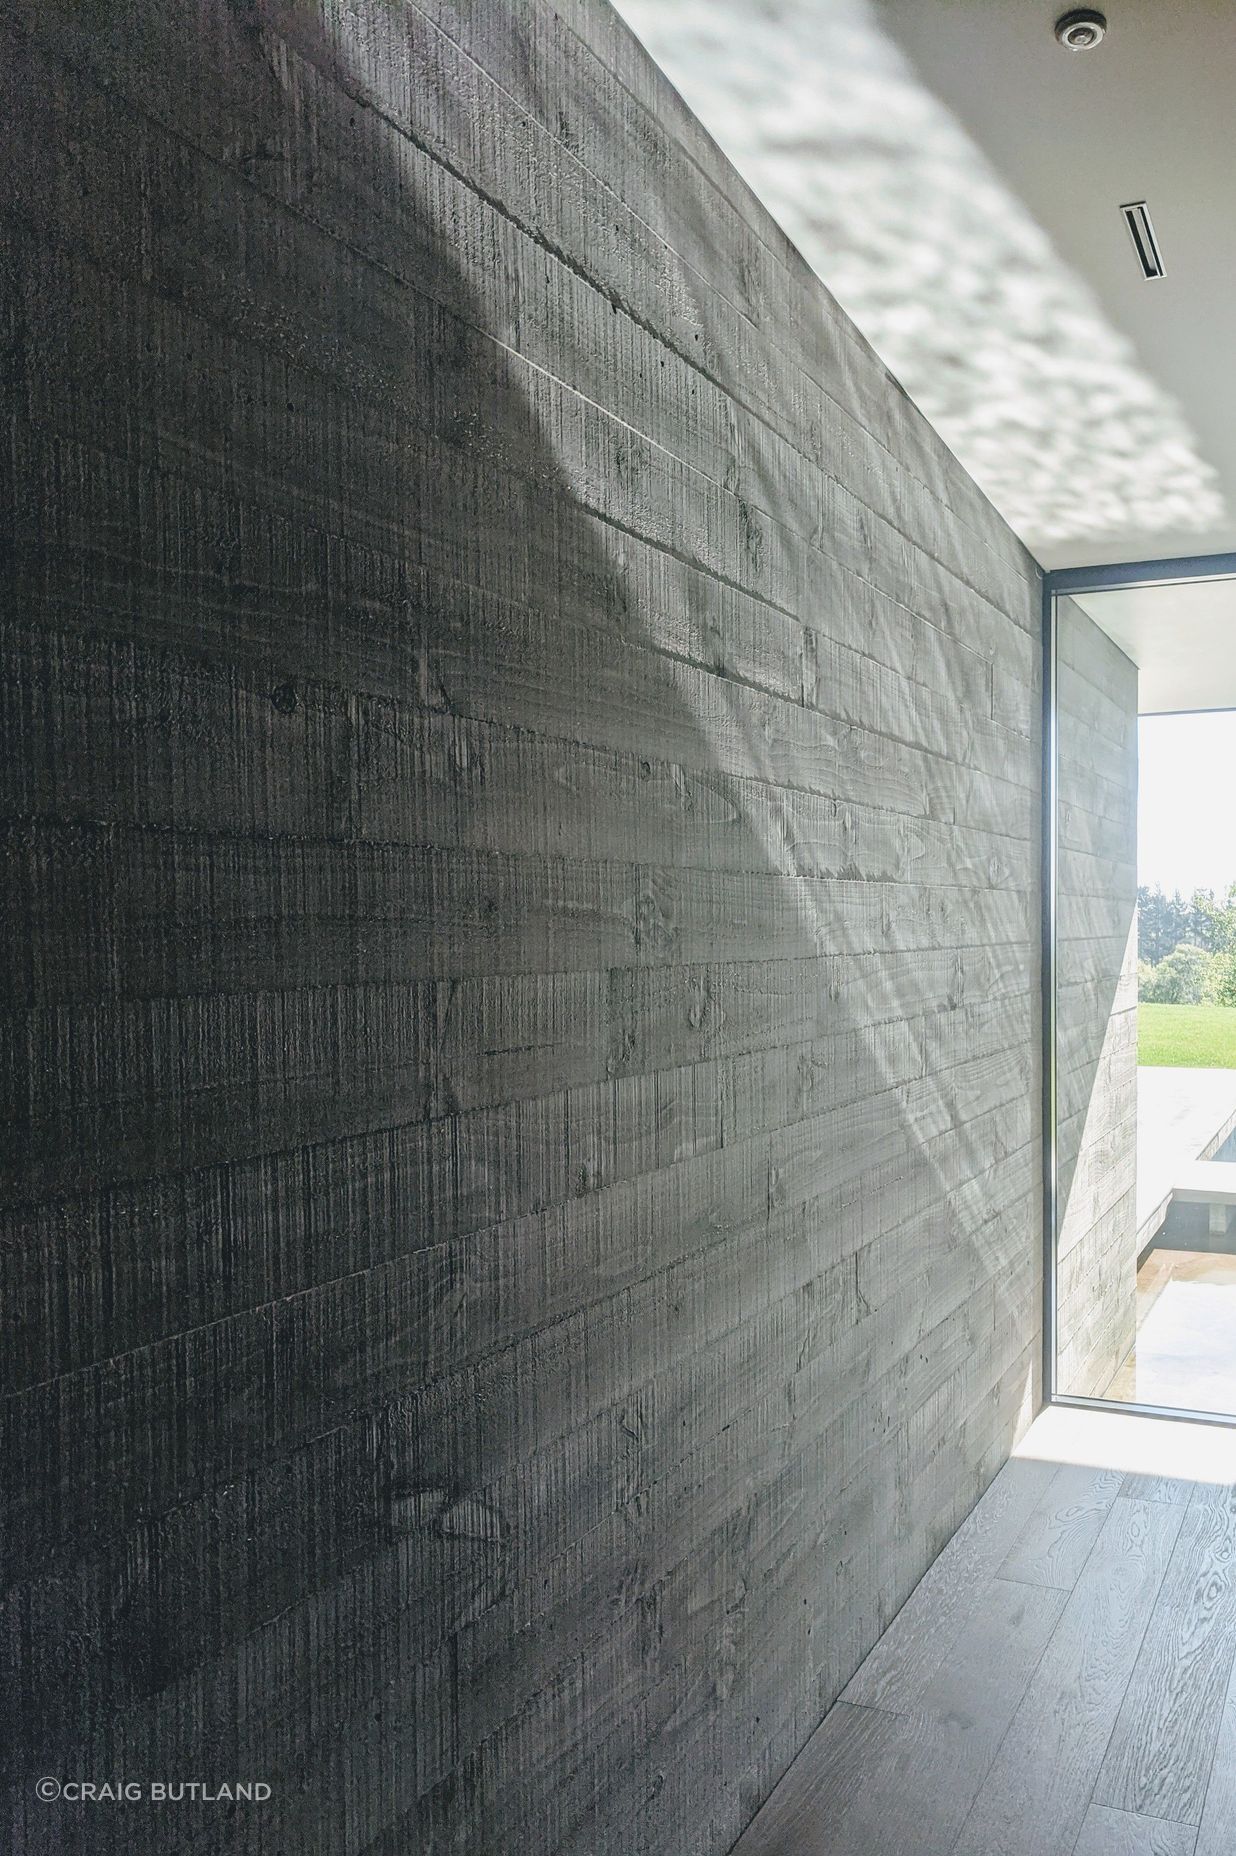 Insitu-concrete walls run seamlessly throughout the building from exterior to interior.